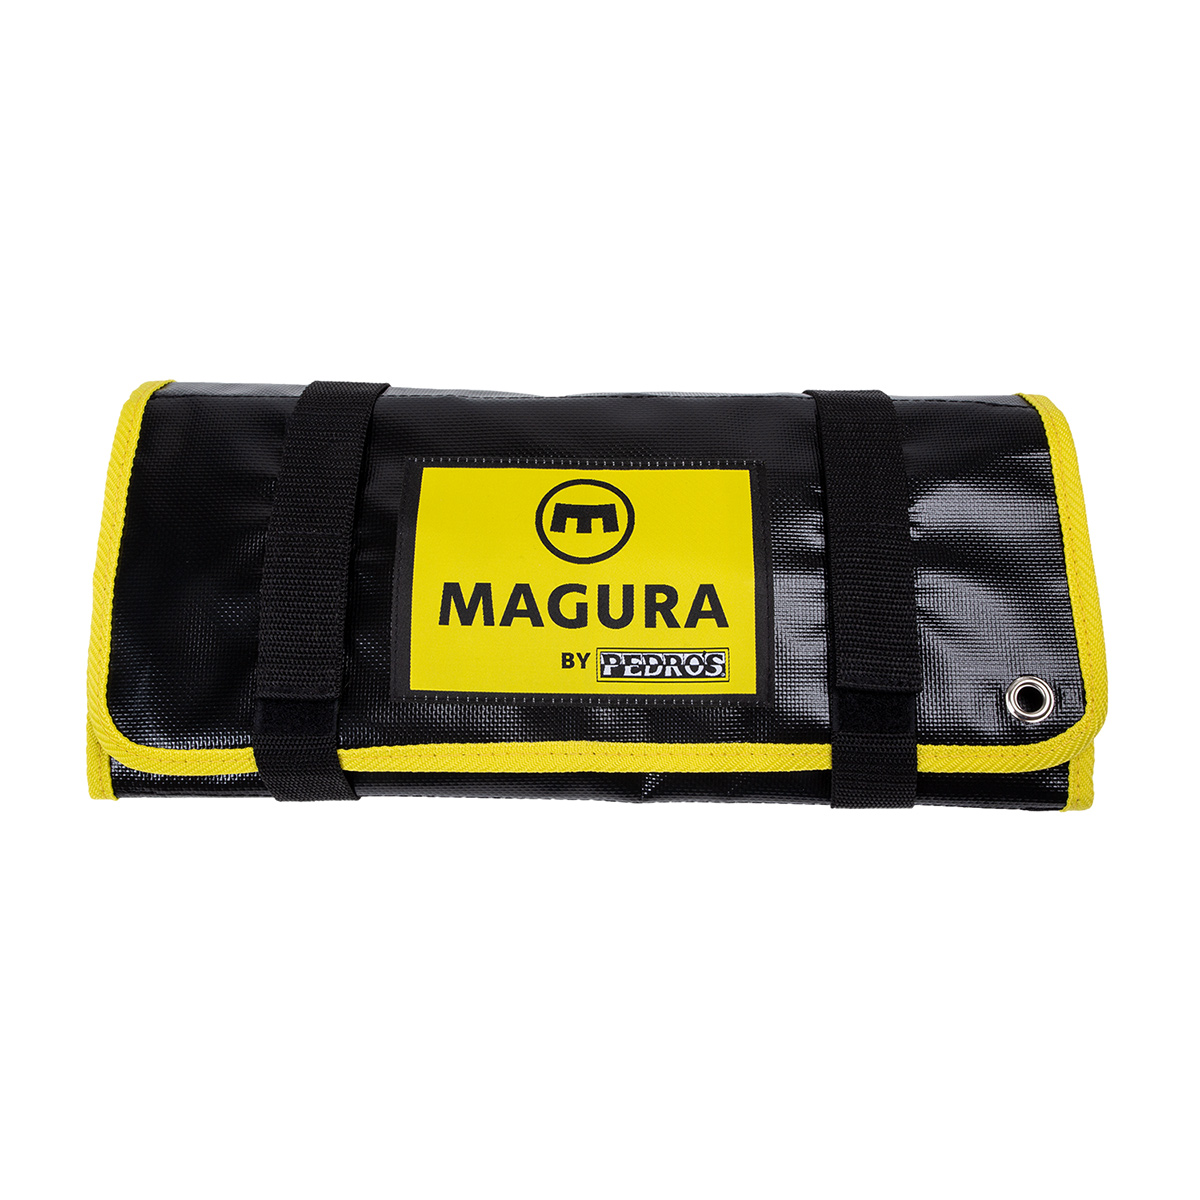 MAGURA - Products